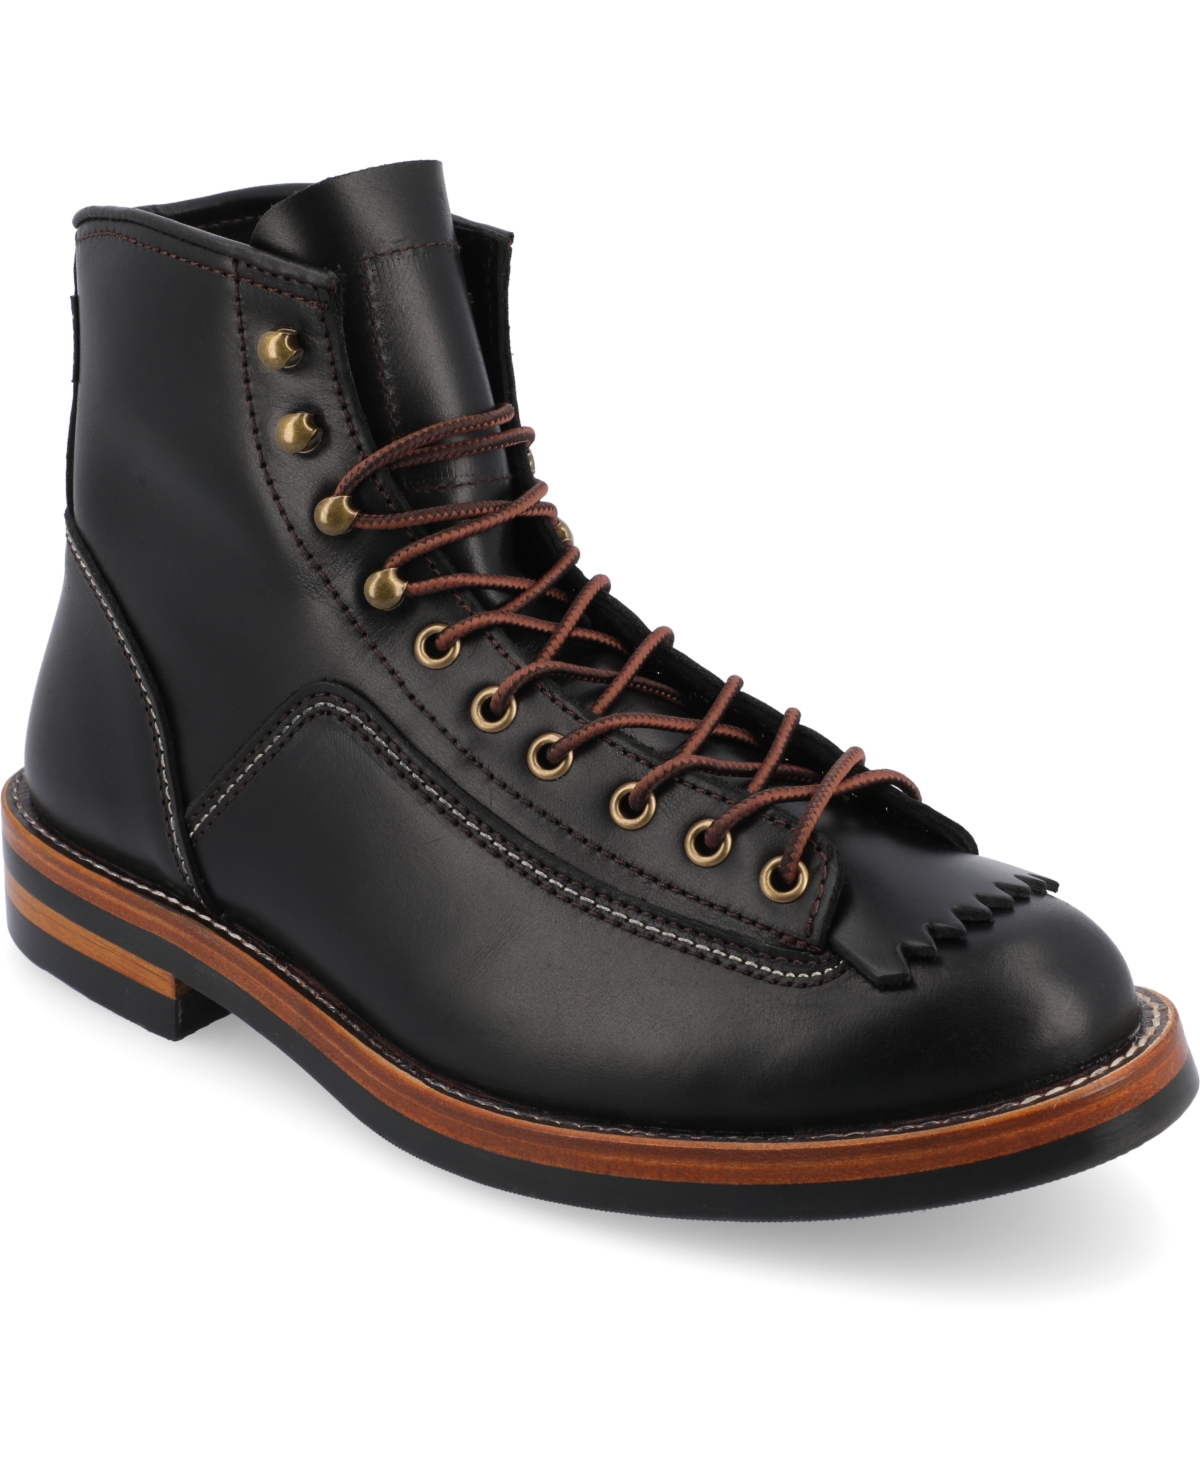 365 Men's Model 007 Rugged Lace-Up Boots - Cherry, Cream